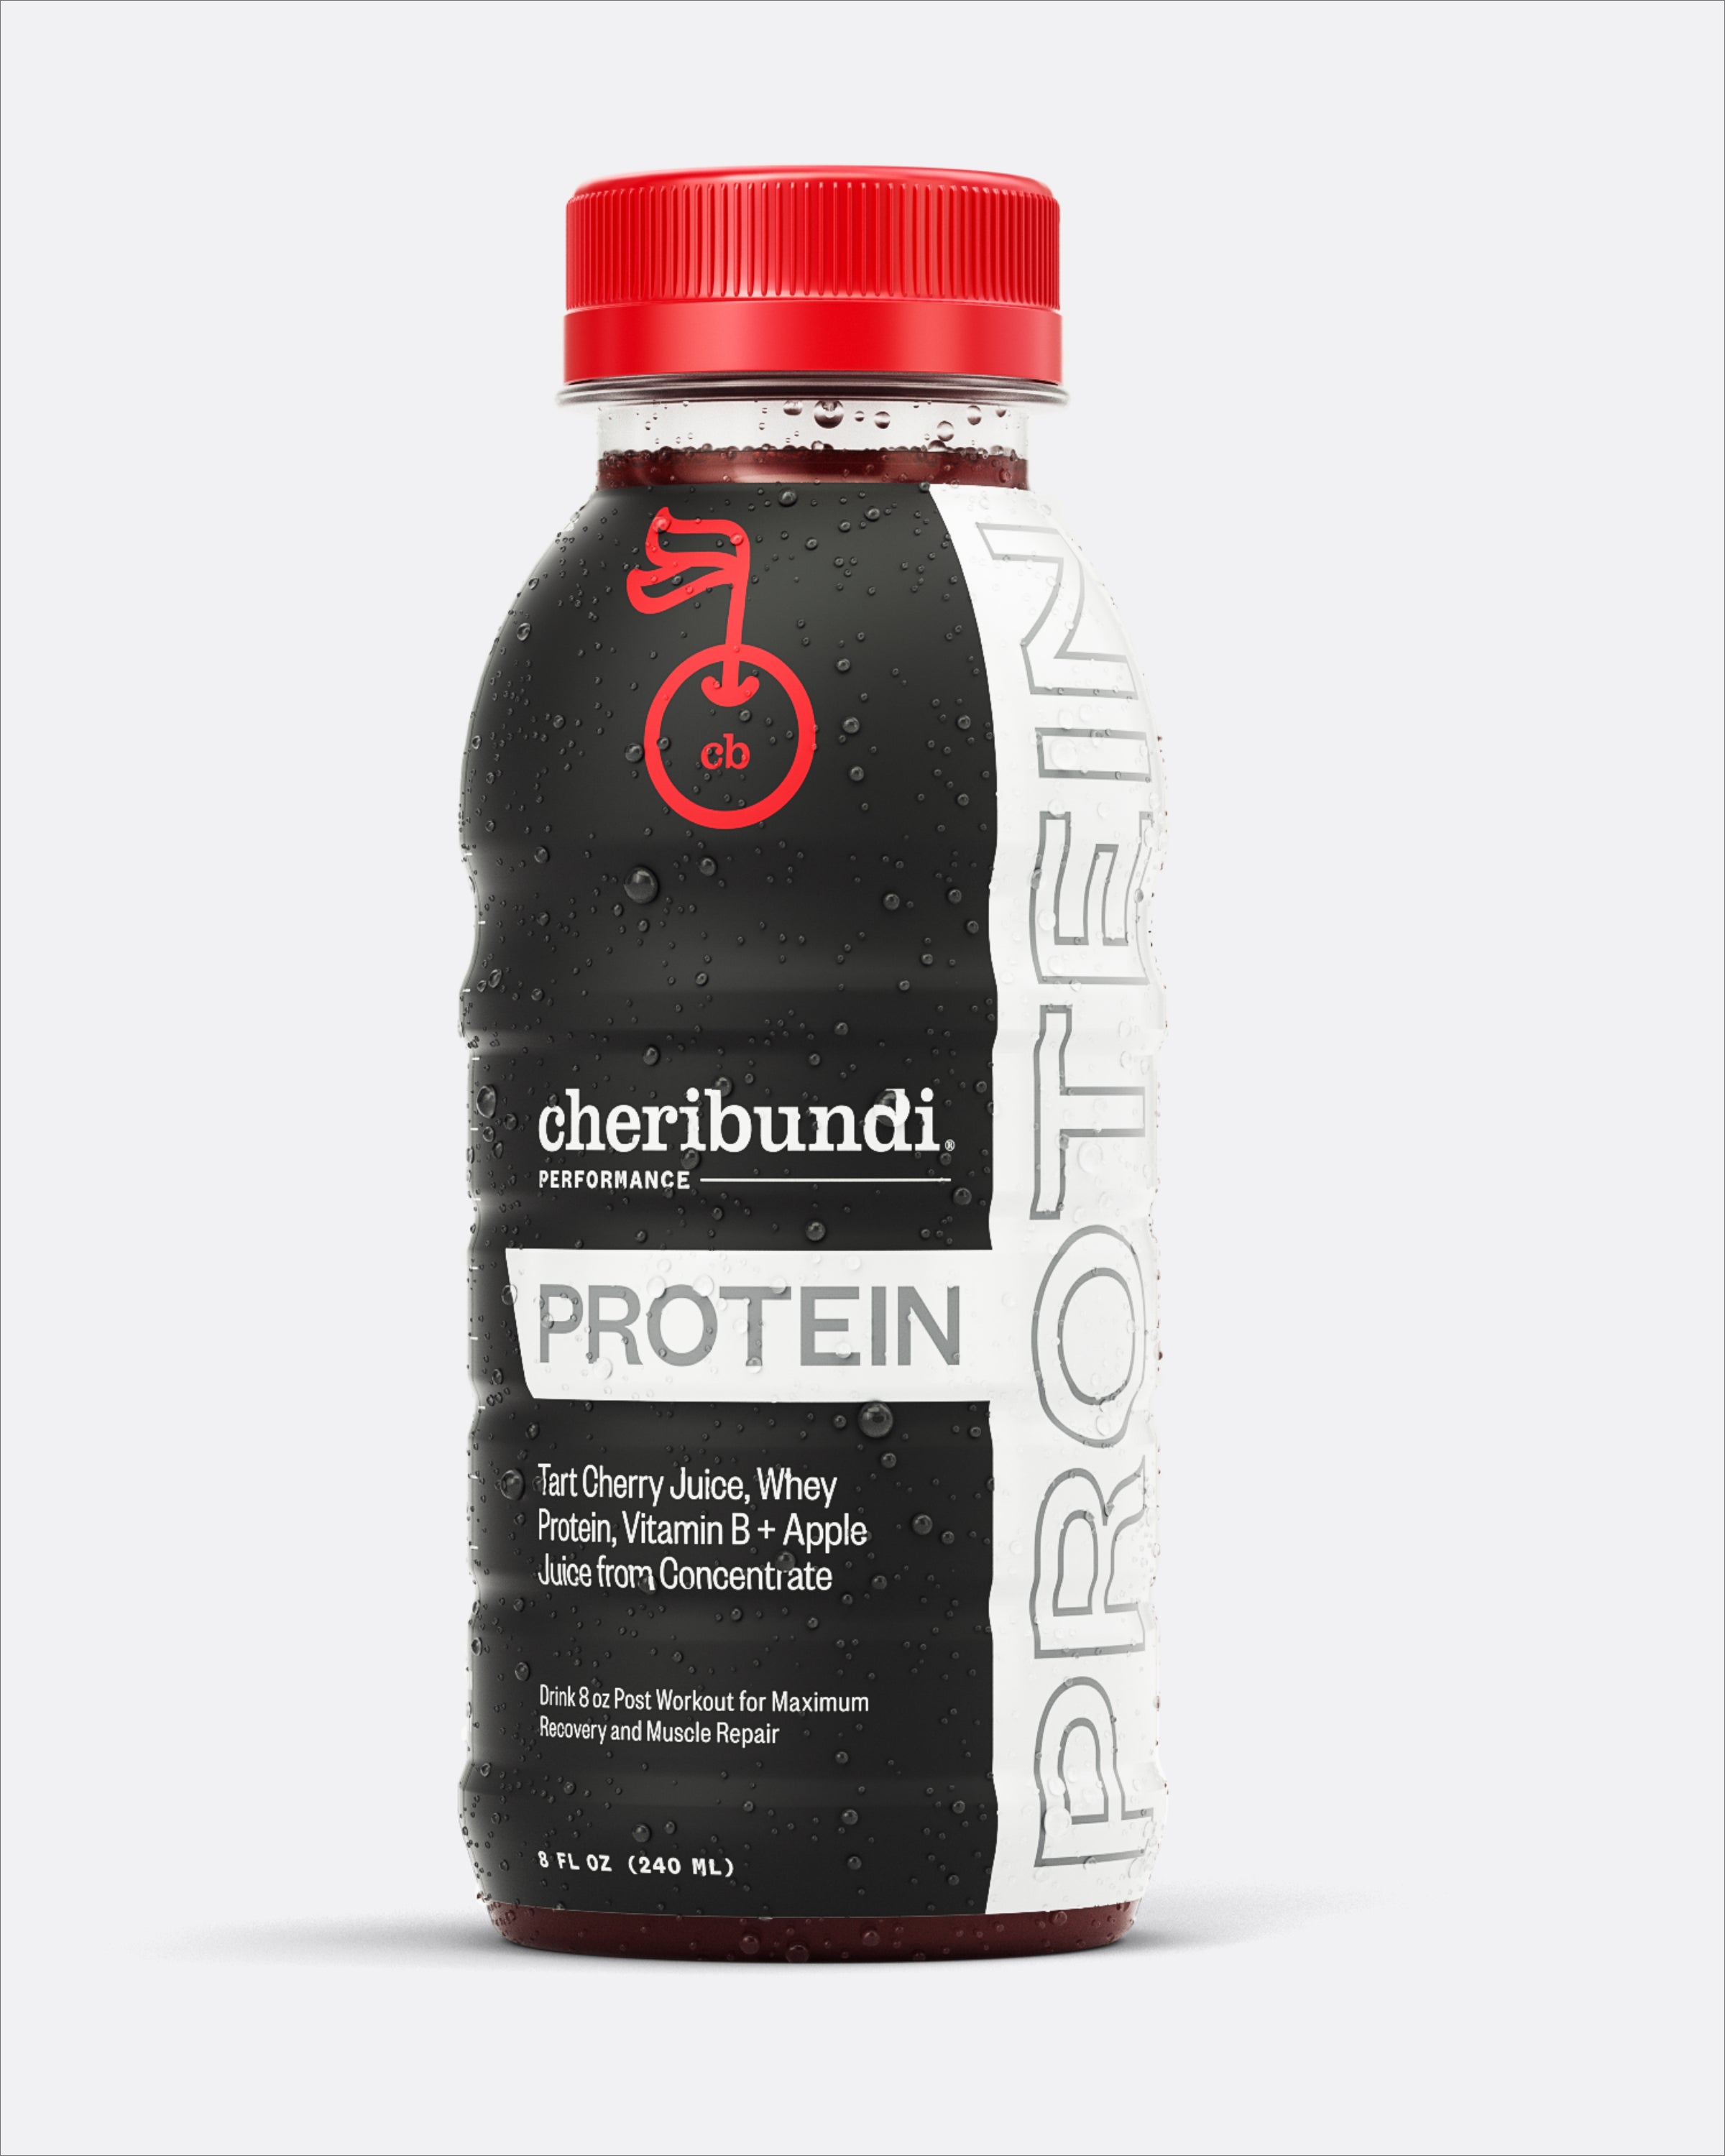 Protein front packaging